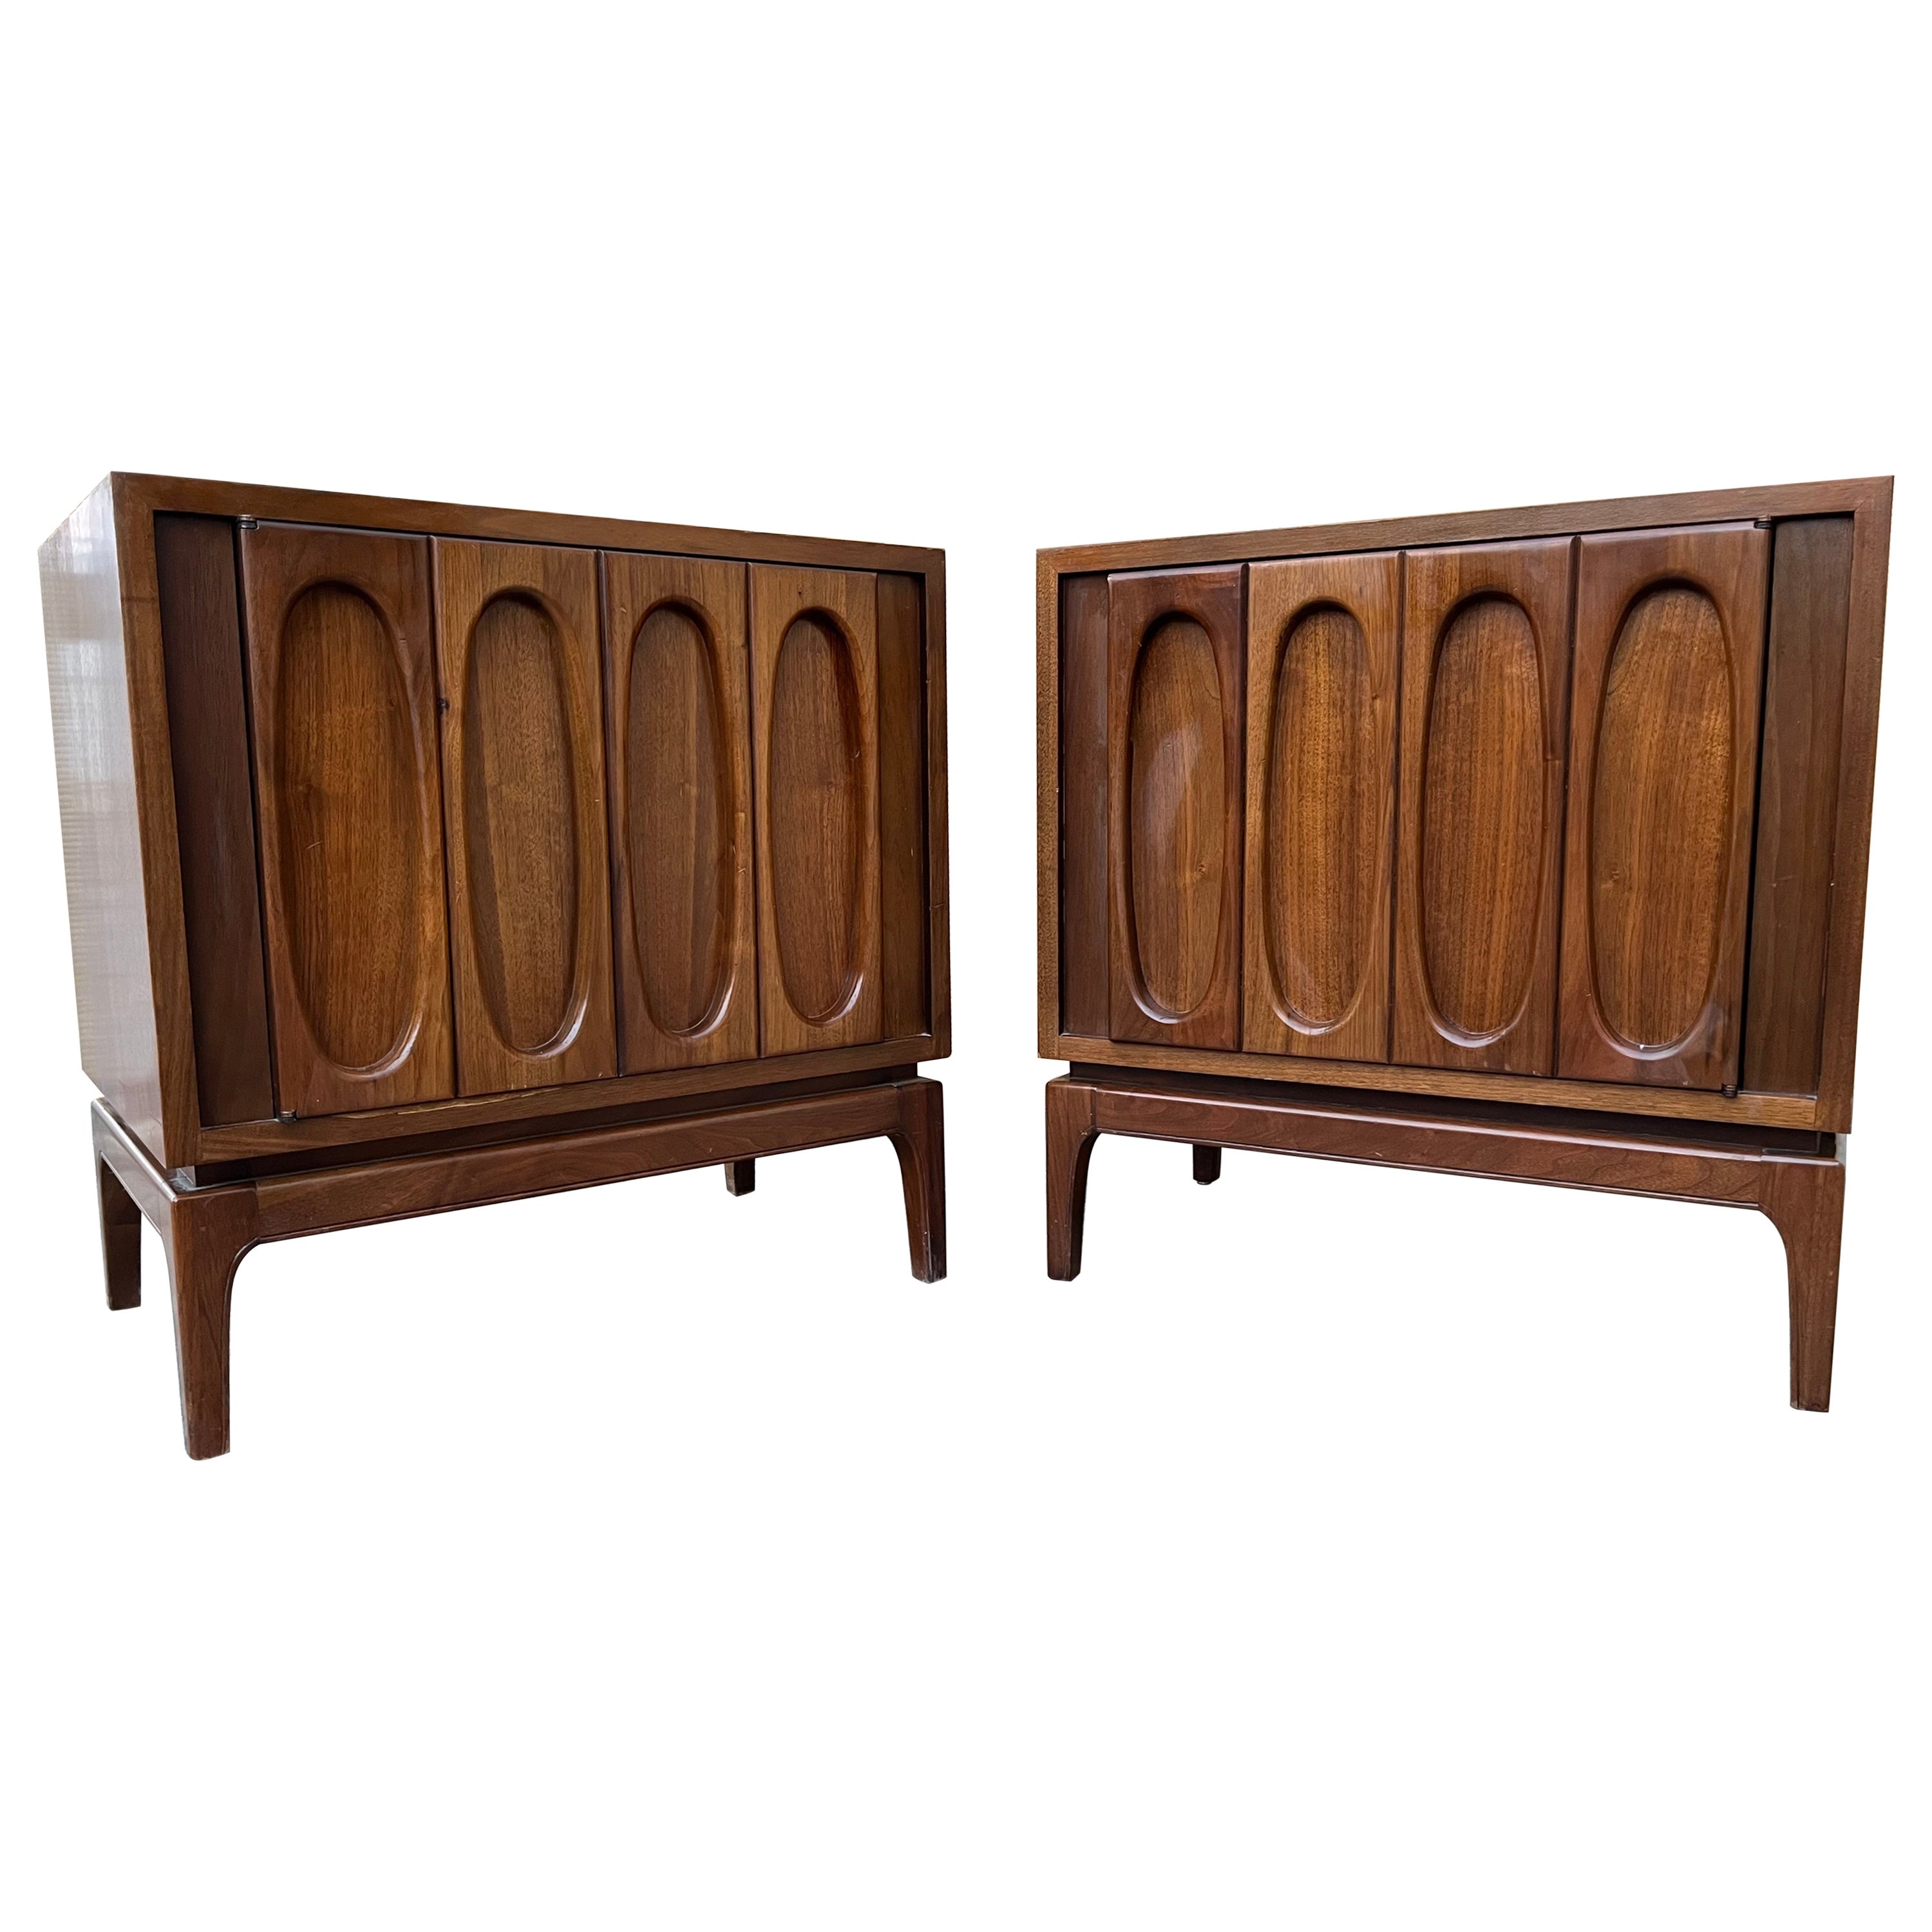 A Pair of Mid Century Modern Brutalist Inspired Nightstands. Circa 1960s. For Sale